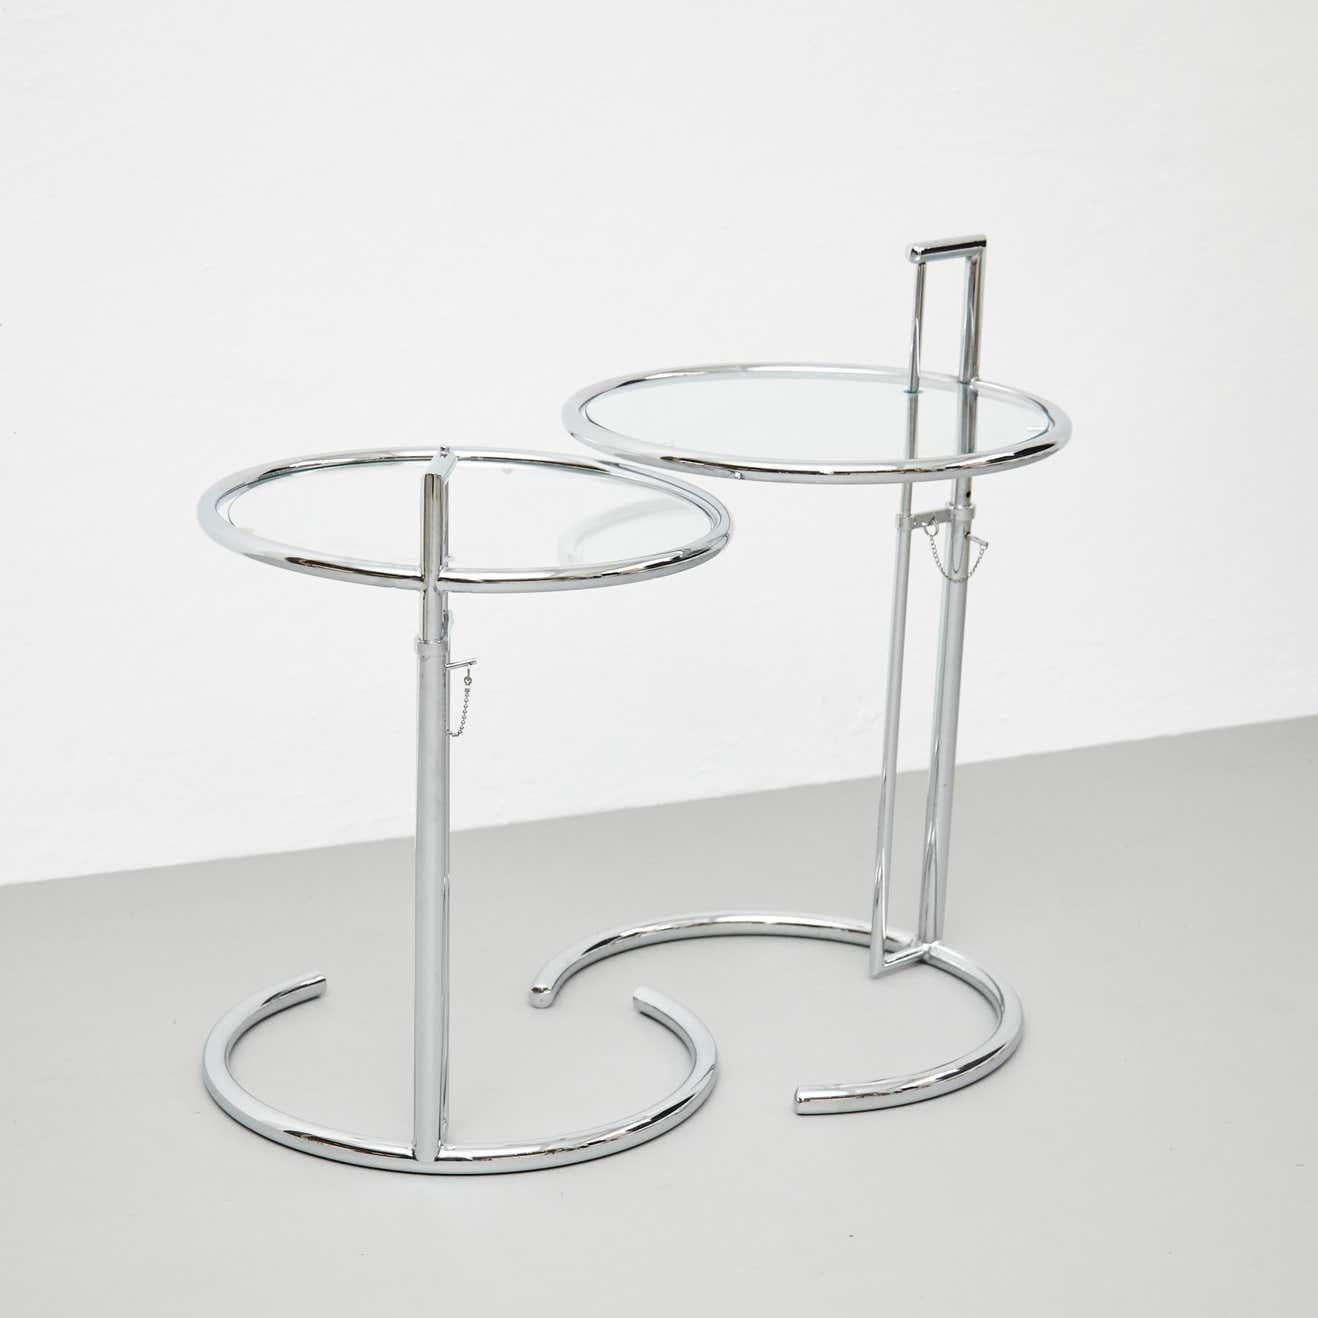 Mid-20th Century After Eileen Gray Pair of E1027 Side Tables, Glass and Tubular Steel, circa 1970